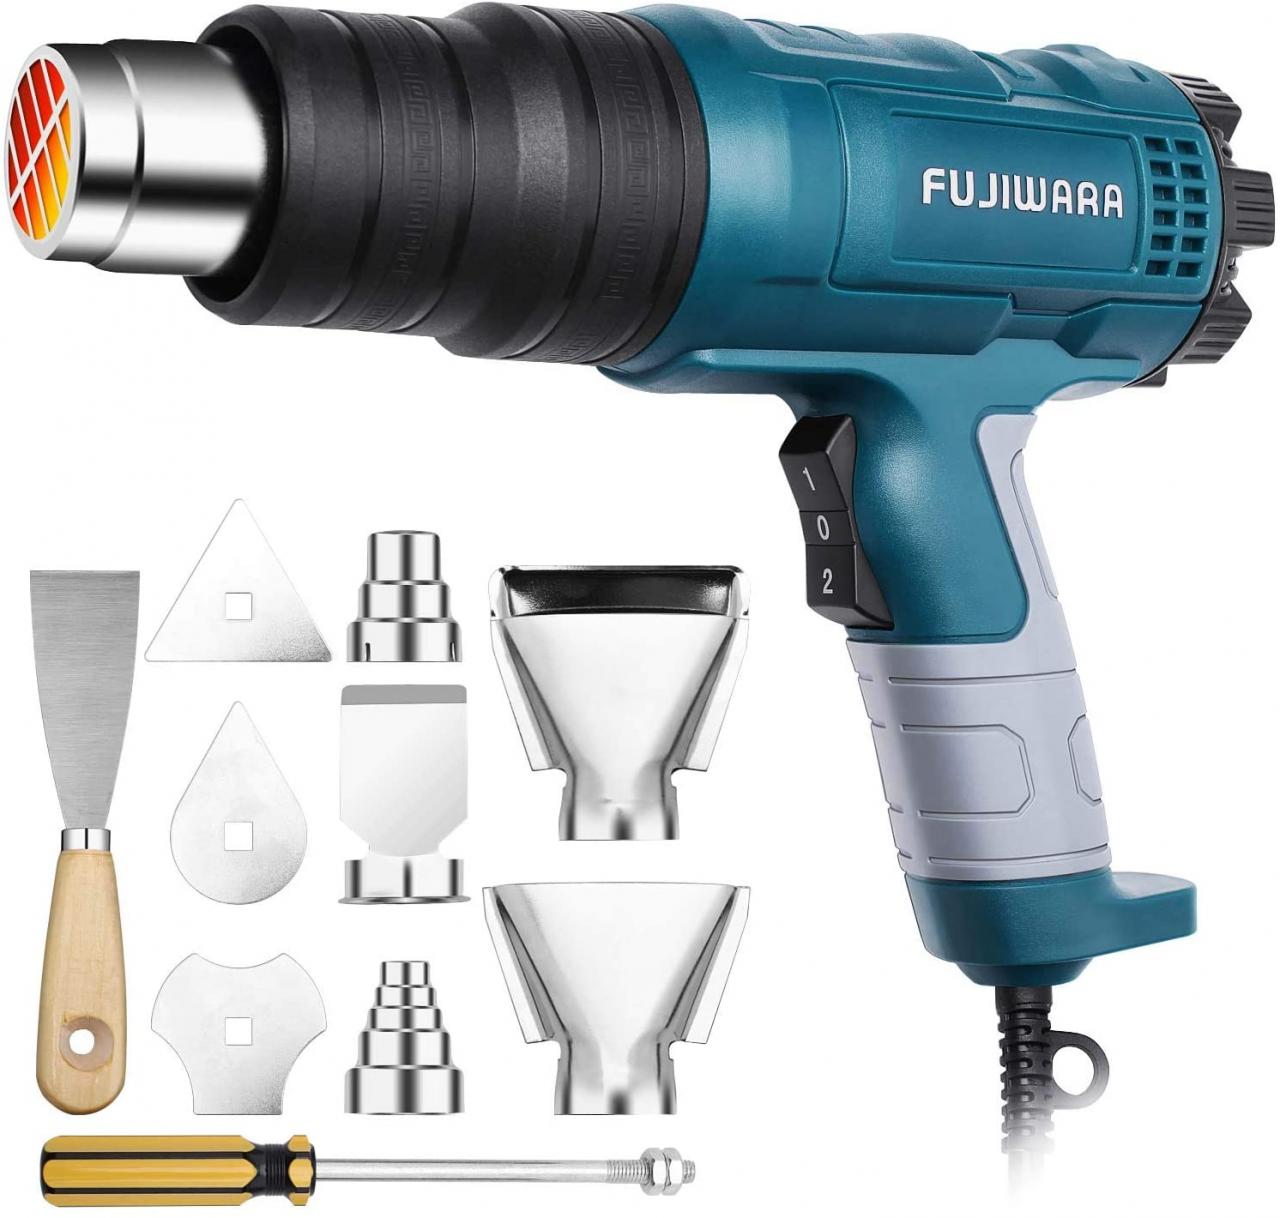 Buy Heat Gun Kit 1500W with Dual-Temperature 5 Nozzles,Hot Air Gun  122ᵒF-1022ᵒF Heating in Seconds for DIY Shrink PVC  Tubing/Wrapping/Crafts,Stripping Paint (1500W 2 Gears Temp Setting) Online  in Indonesia. B07QHBYQXT